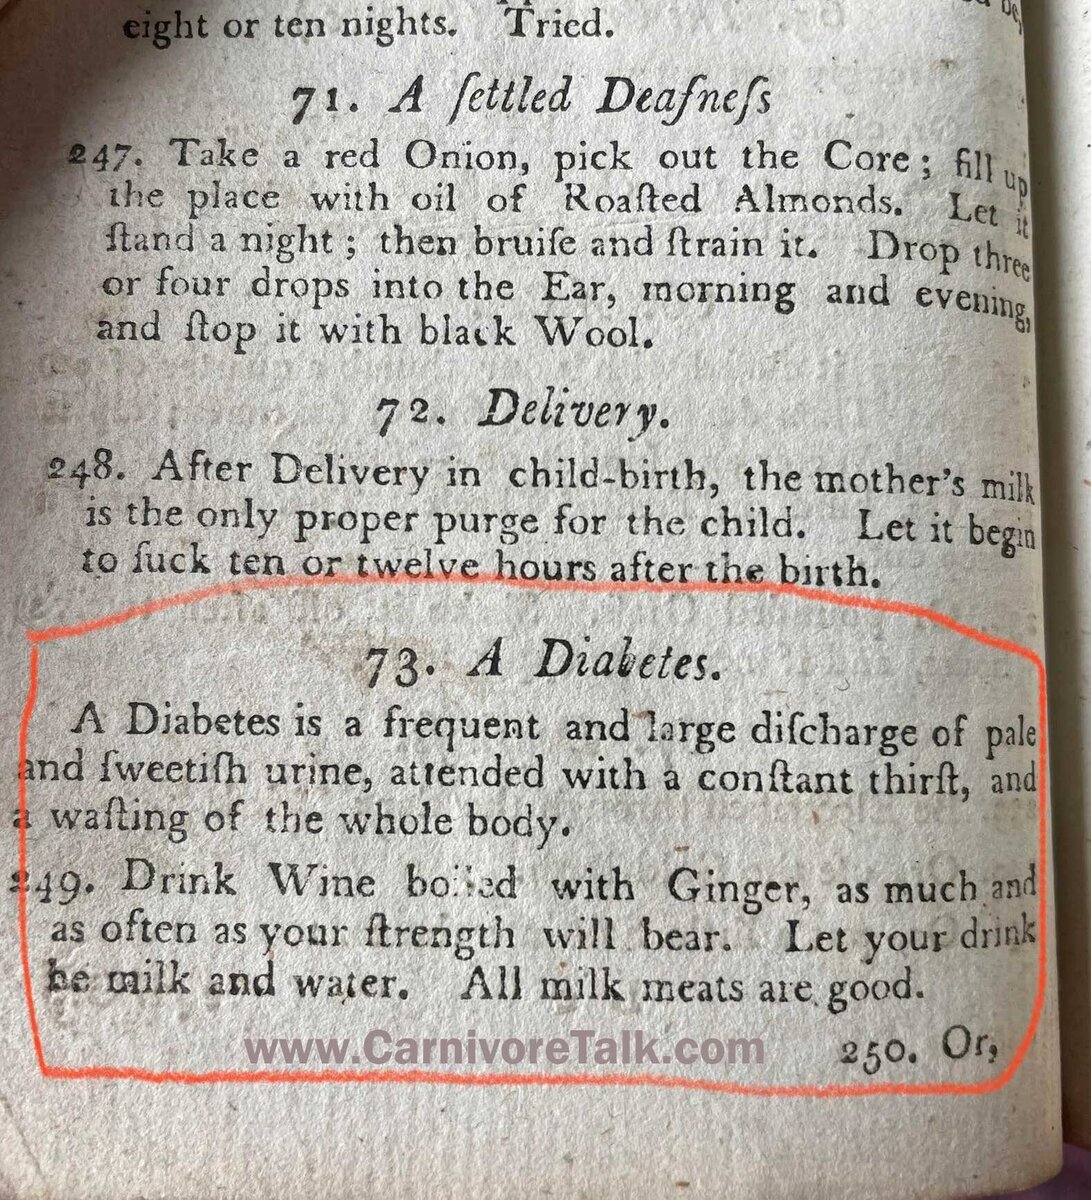 Meat prescribed for diabetes in the 1700's